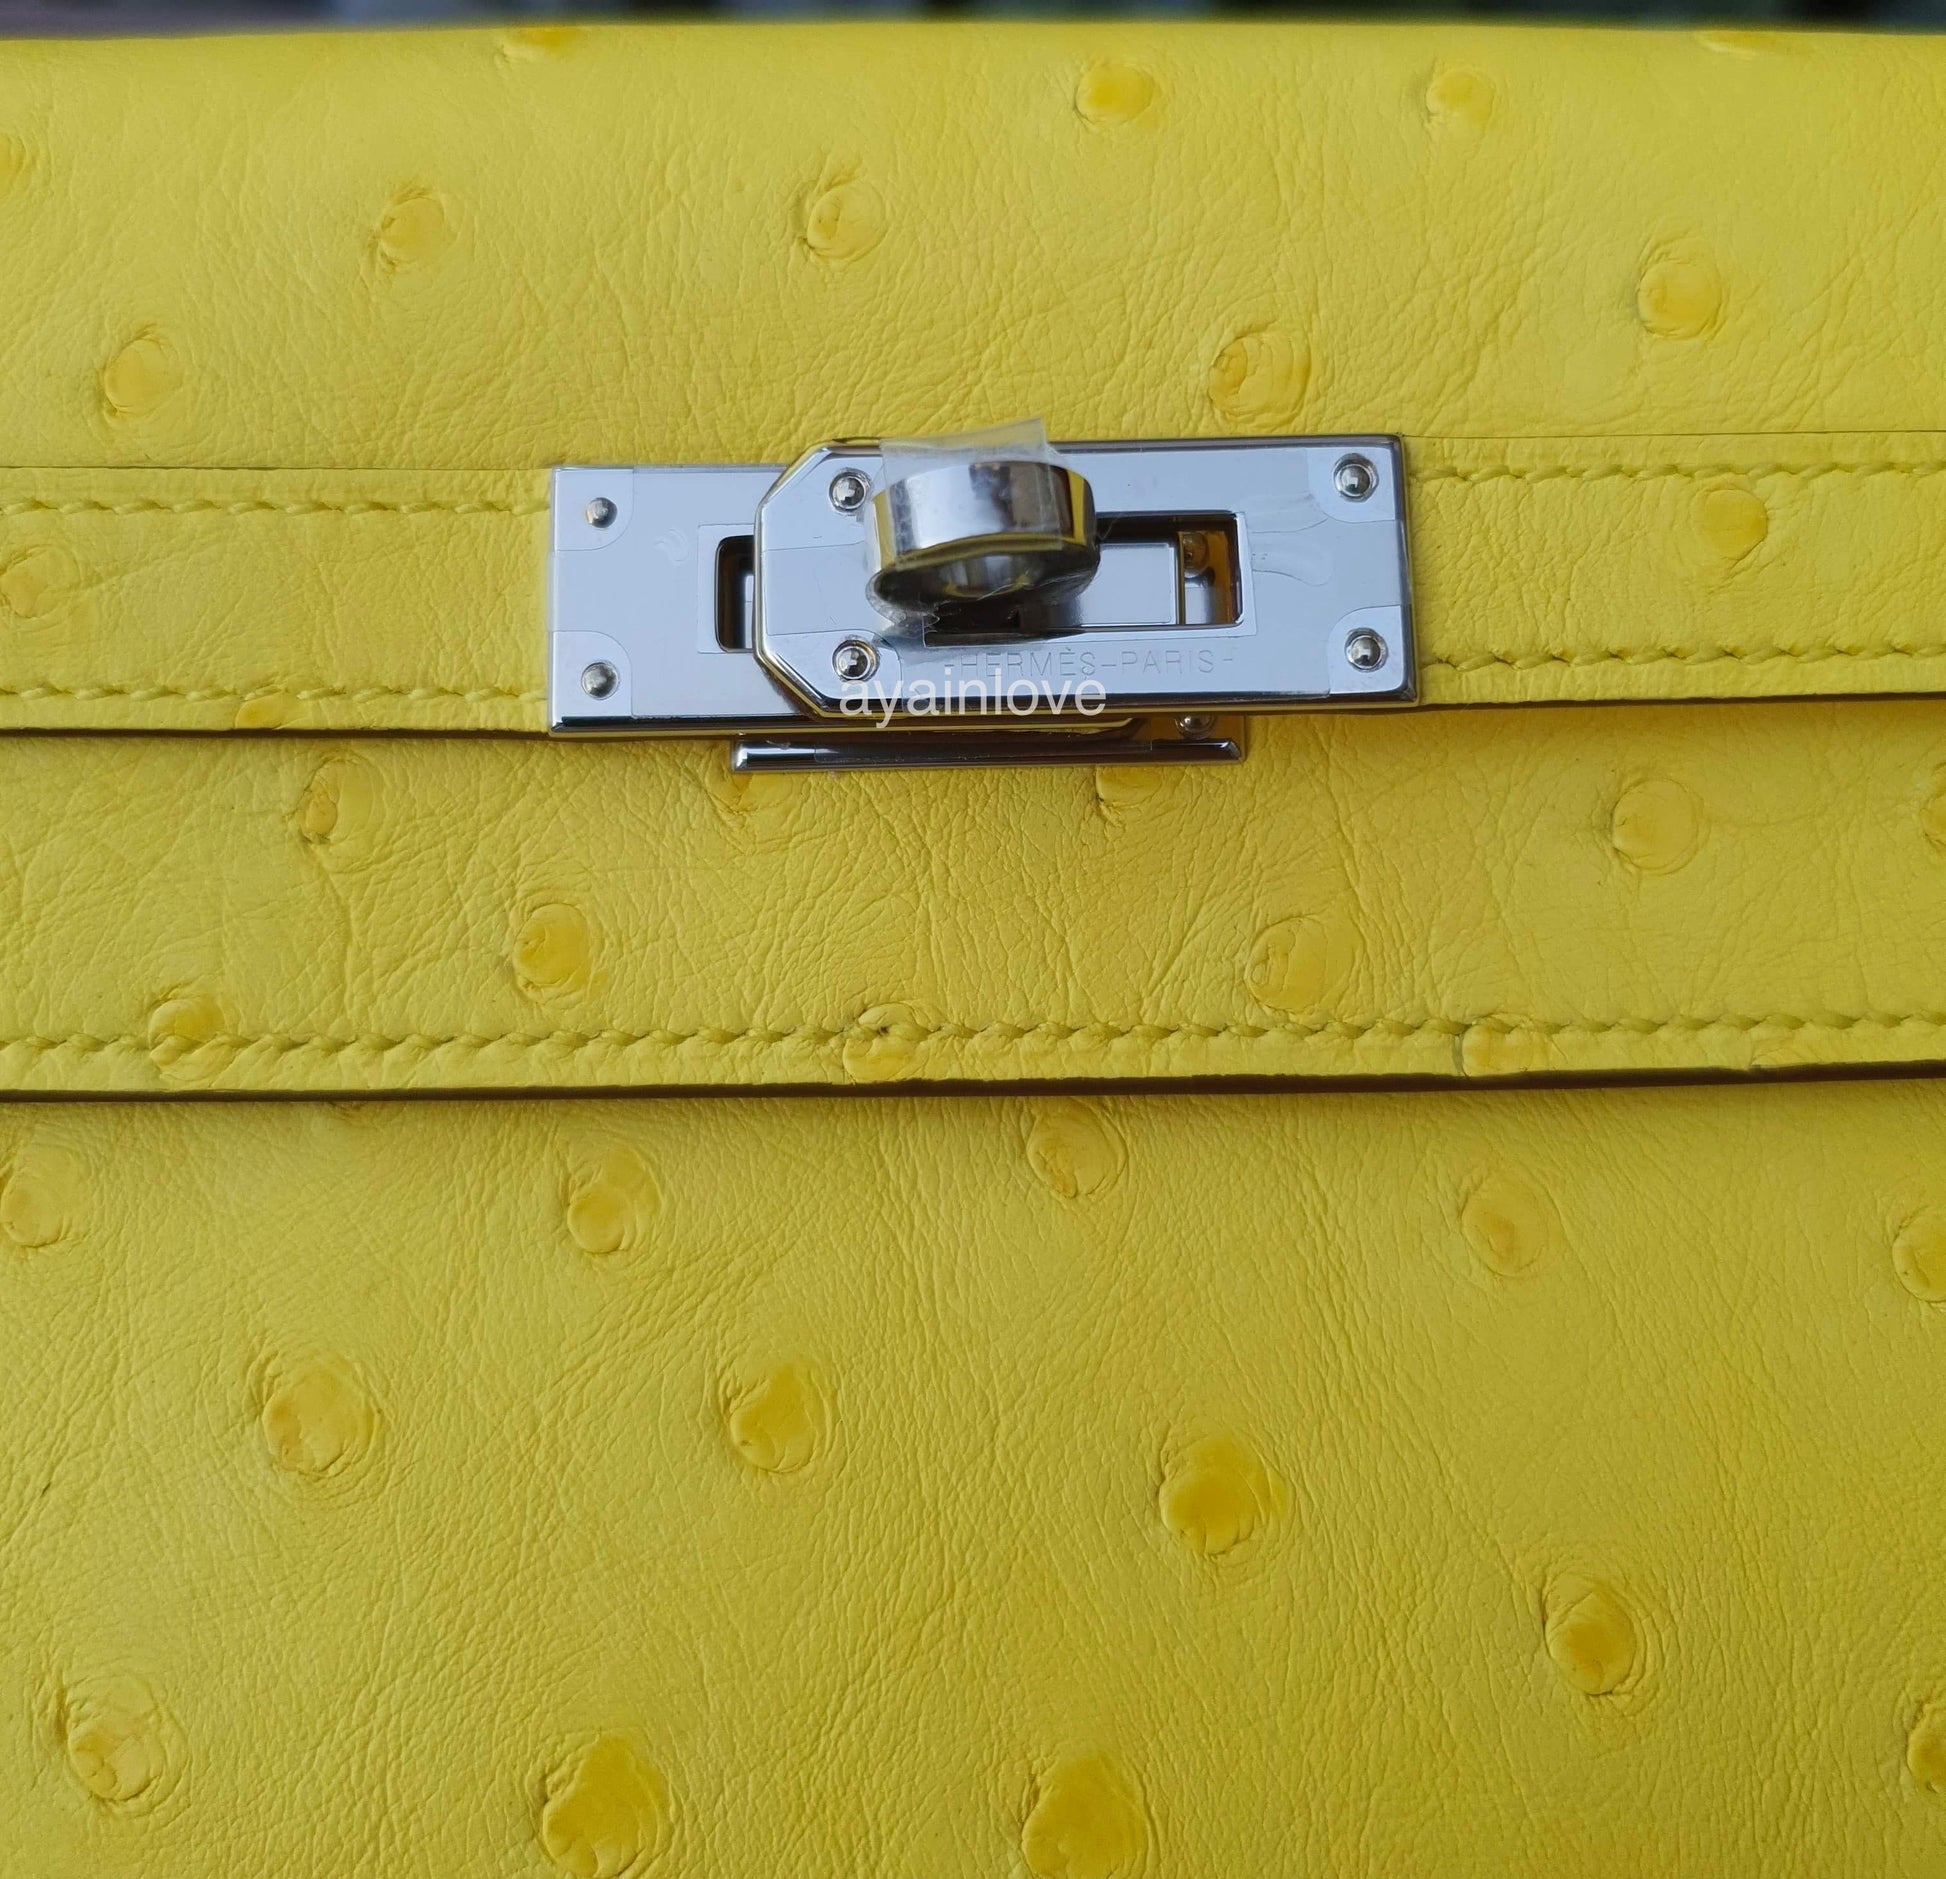 HERMES Kelly To Go 18 Clutch Ostrich Jaune Citron Paladium Hardware –  AYAINLOVE CURATED LUXURIES